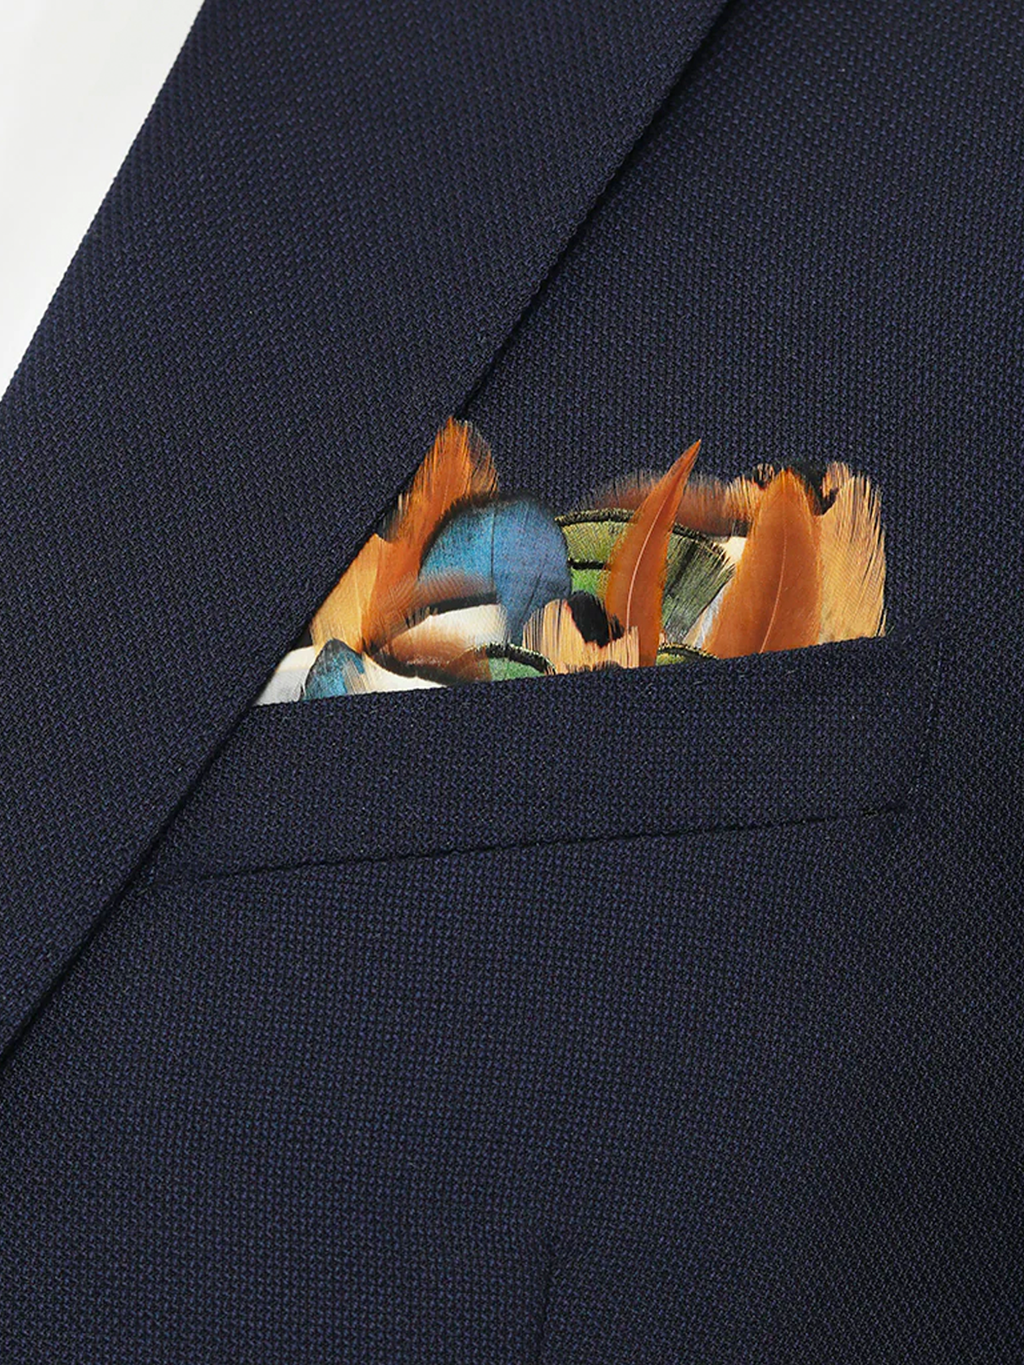 Persian Feather Pocket Square